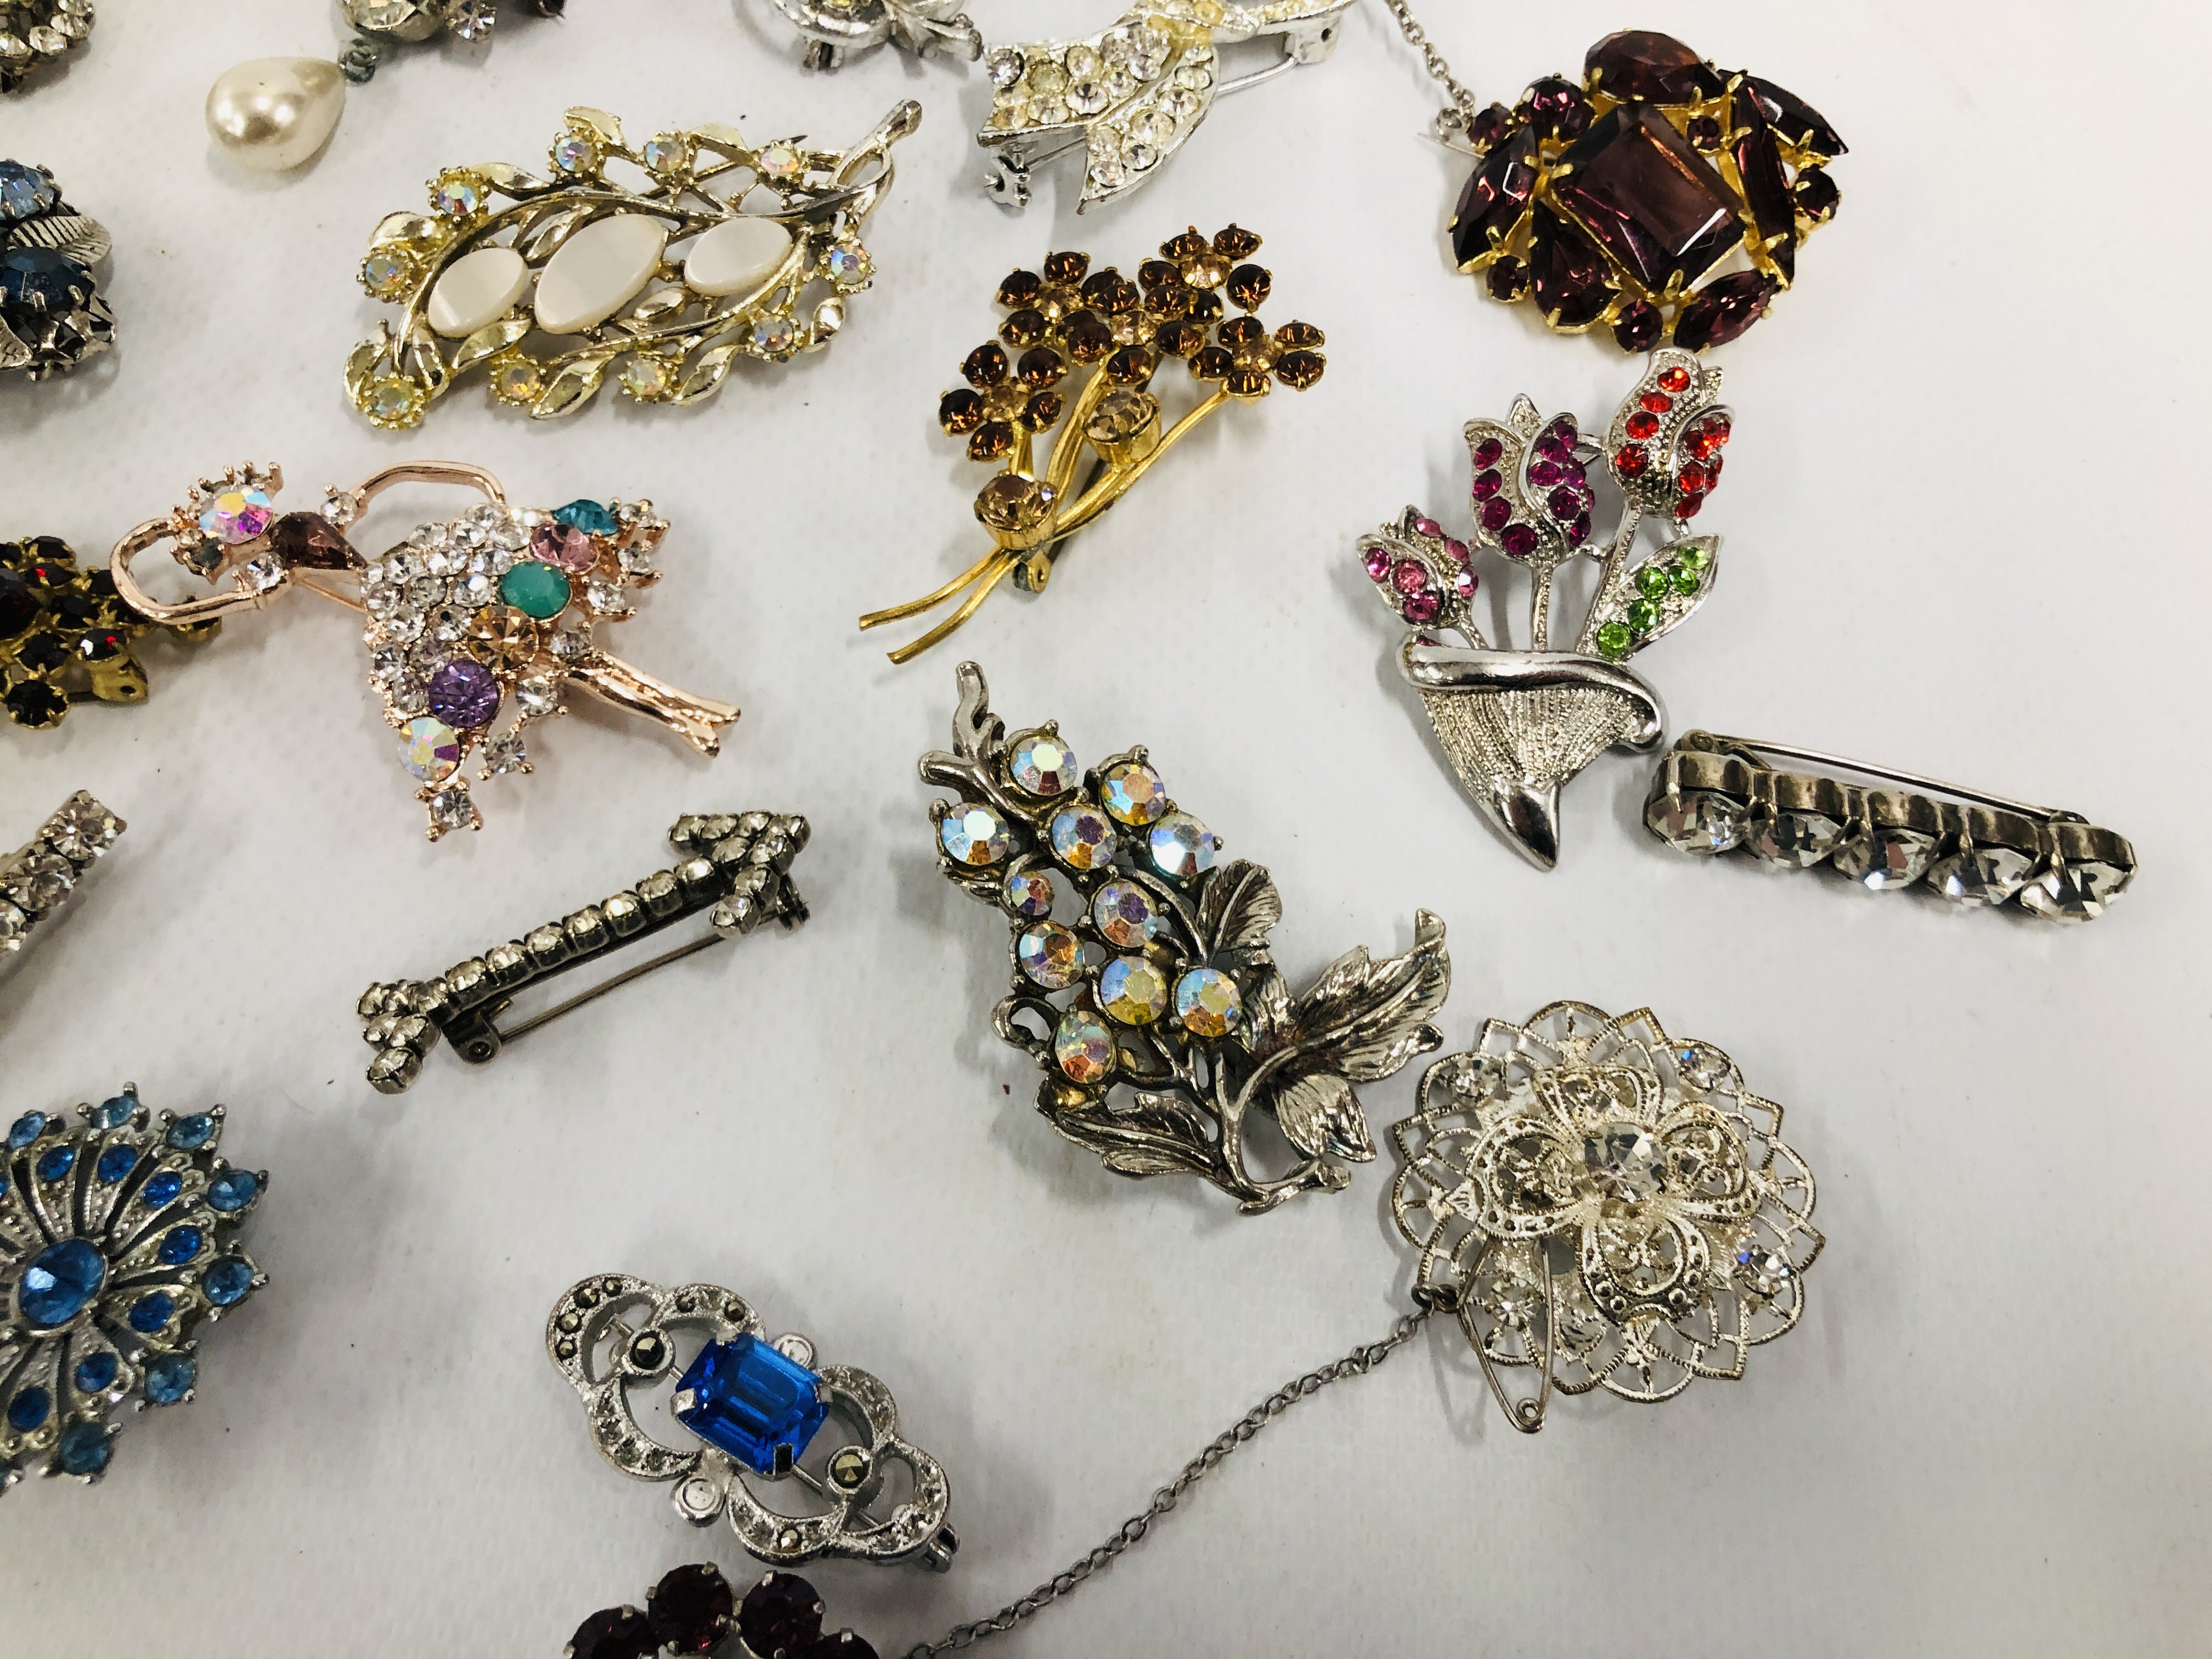 COLLECTION OF 23 VINTAGE AND RETRO SILVER AND GOLD TONE BROOCHES. - Image 5 of 6